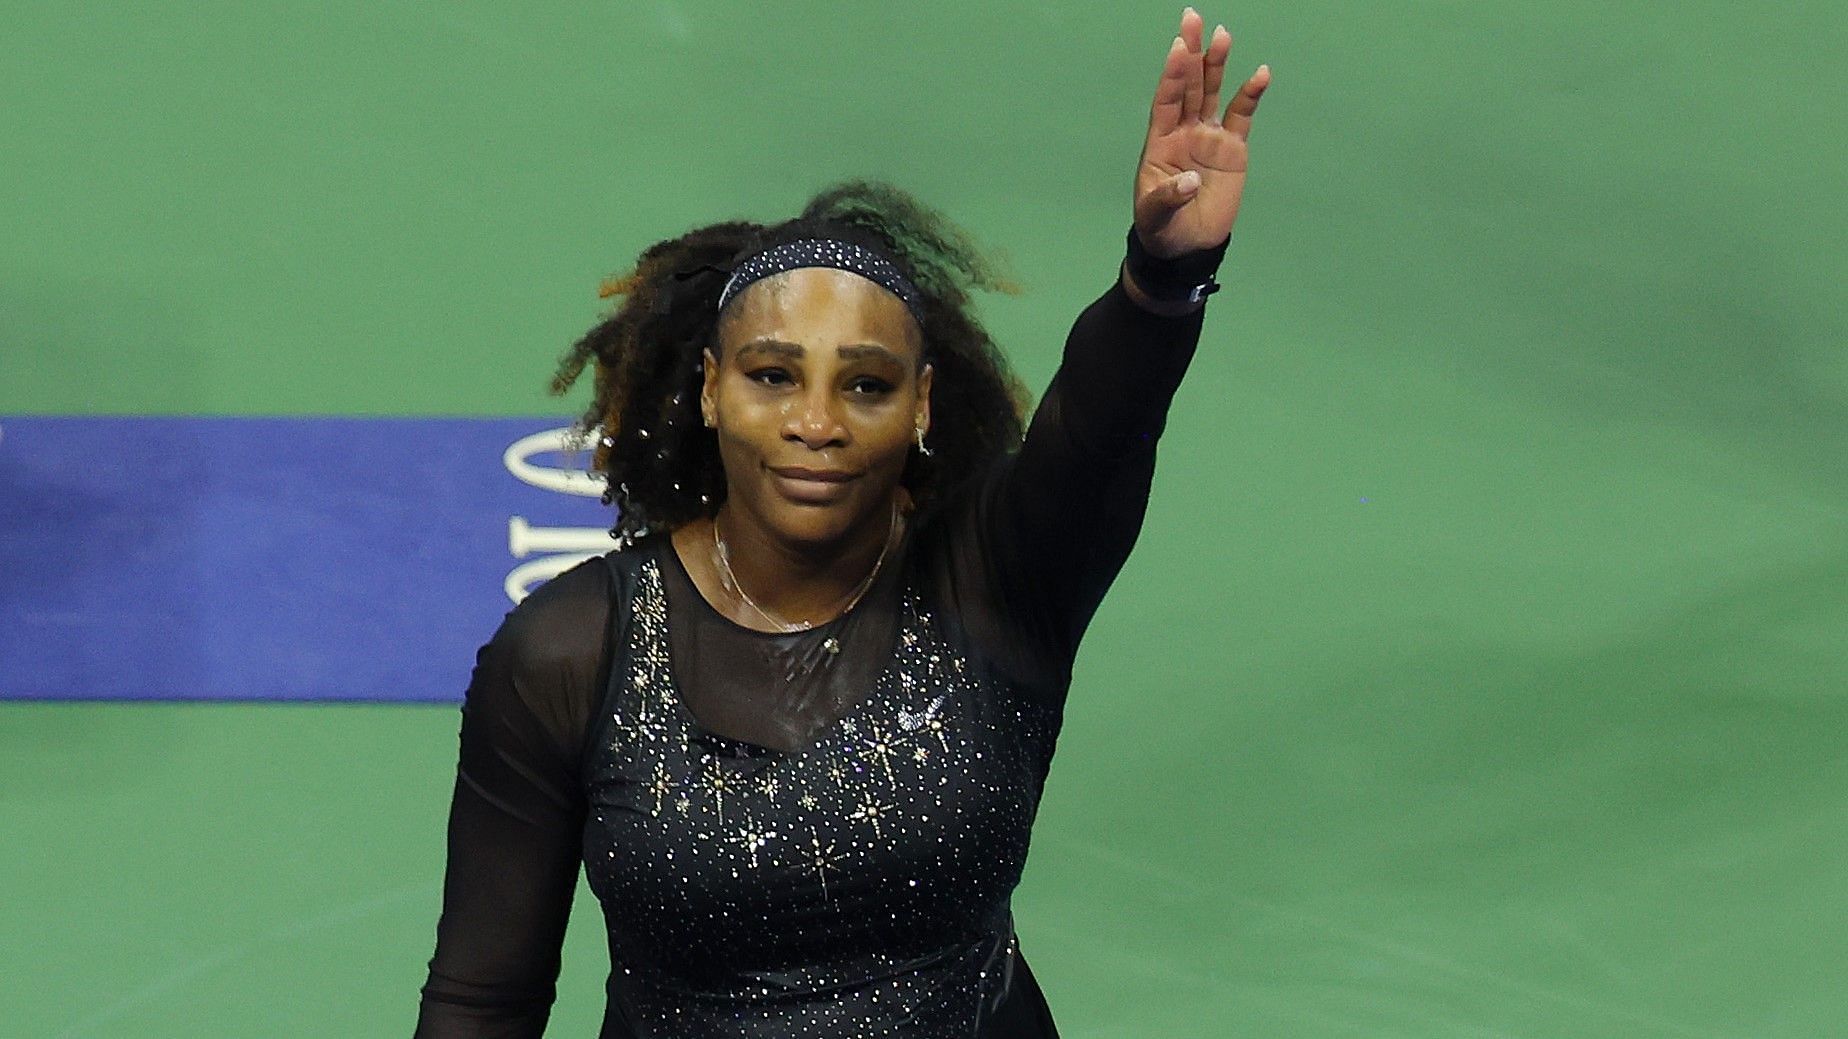 Serena Wiliams retired from tennis after the 2022 US Open